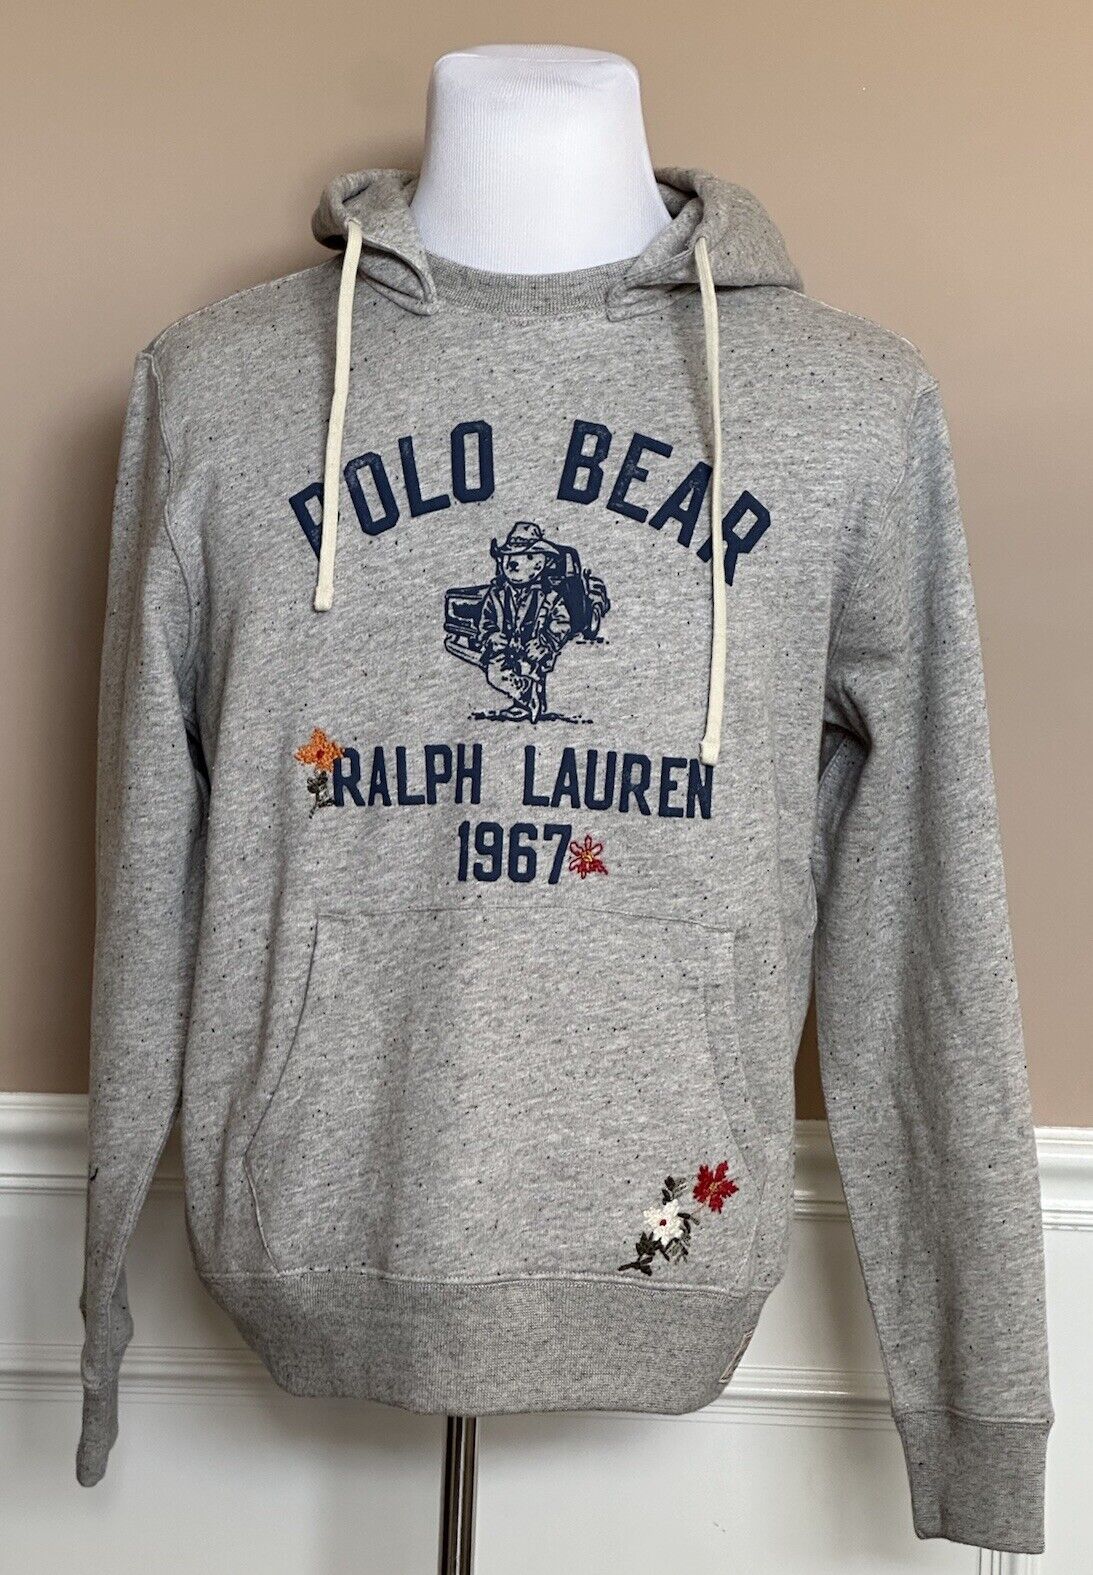 NWT $248 Polo Ralph Lauren Bear with Embroidery Sweatshirt with Hoodie Gray M